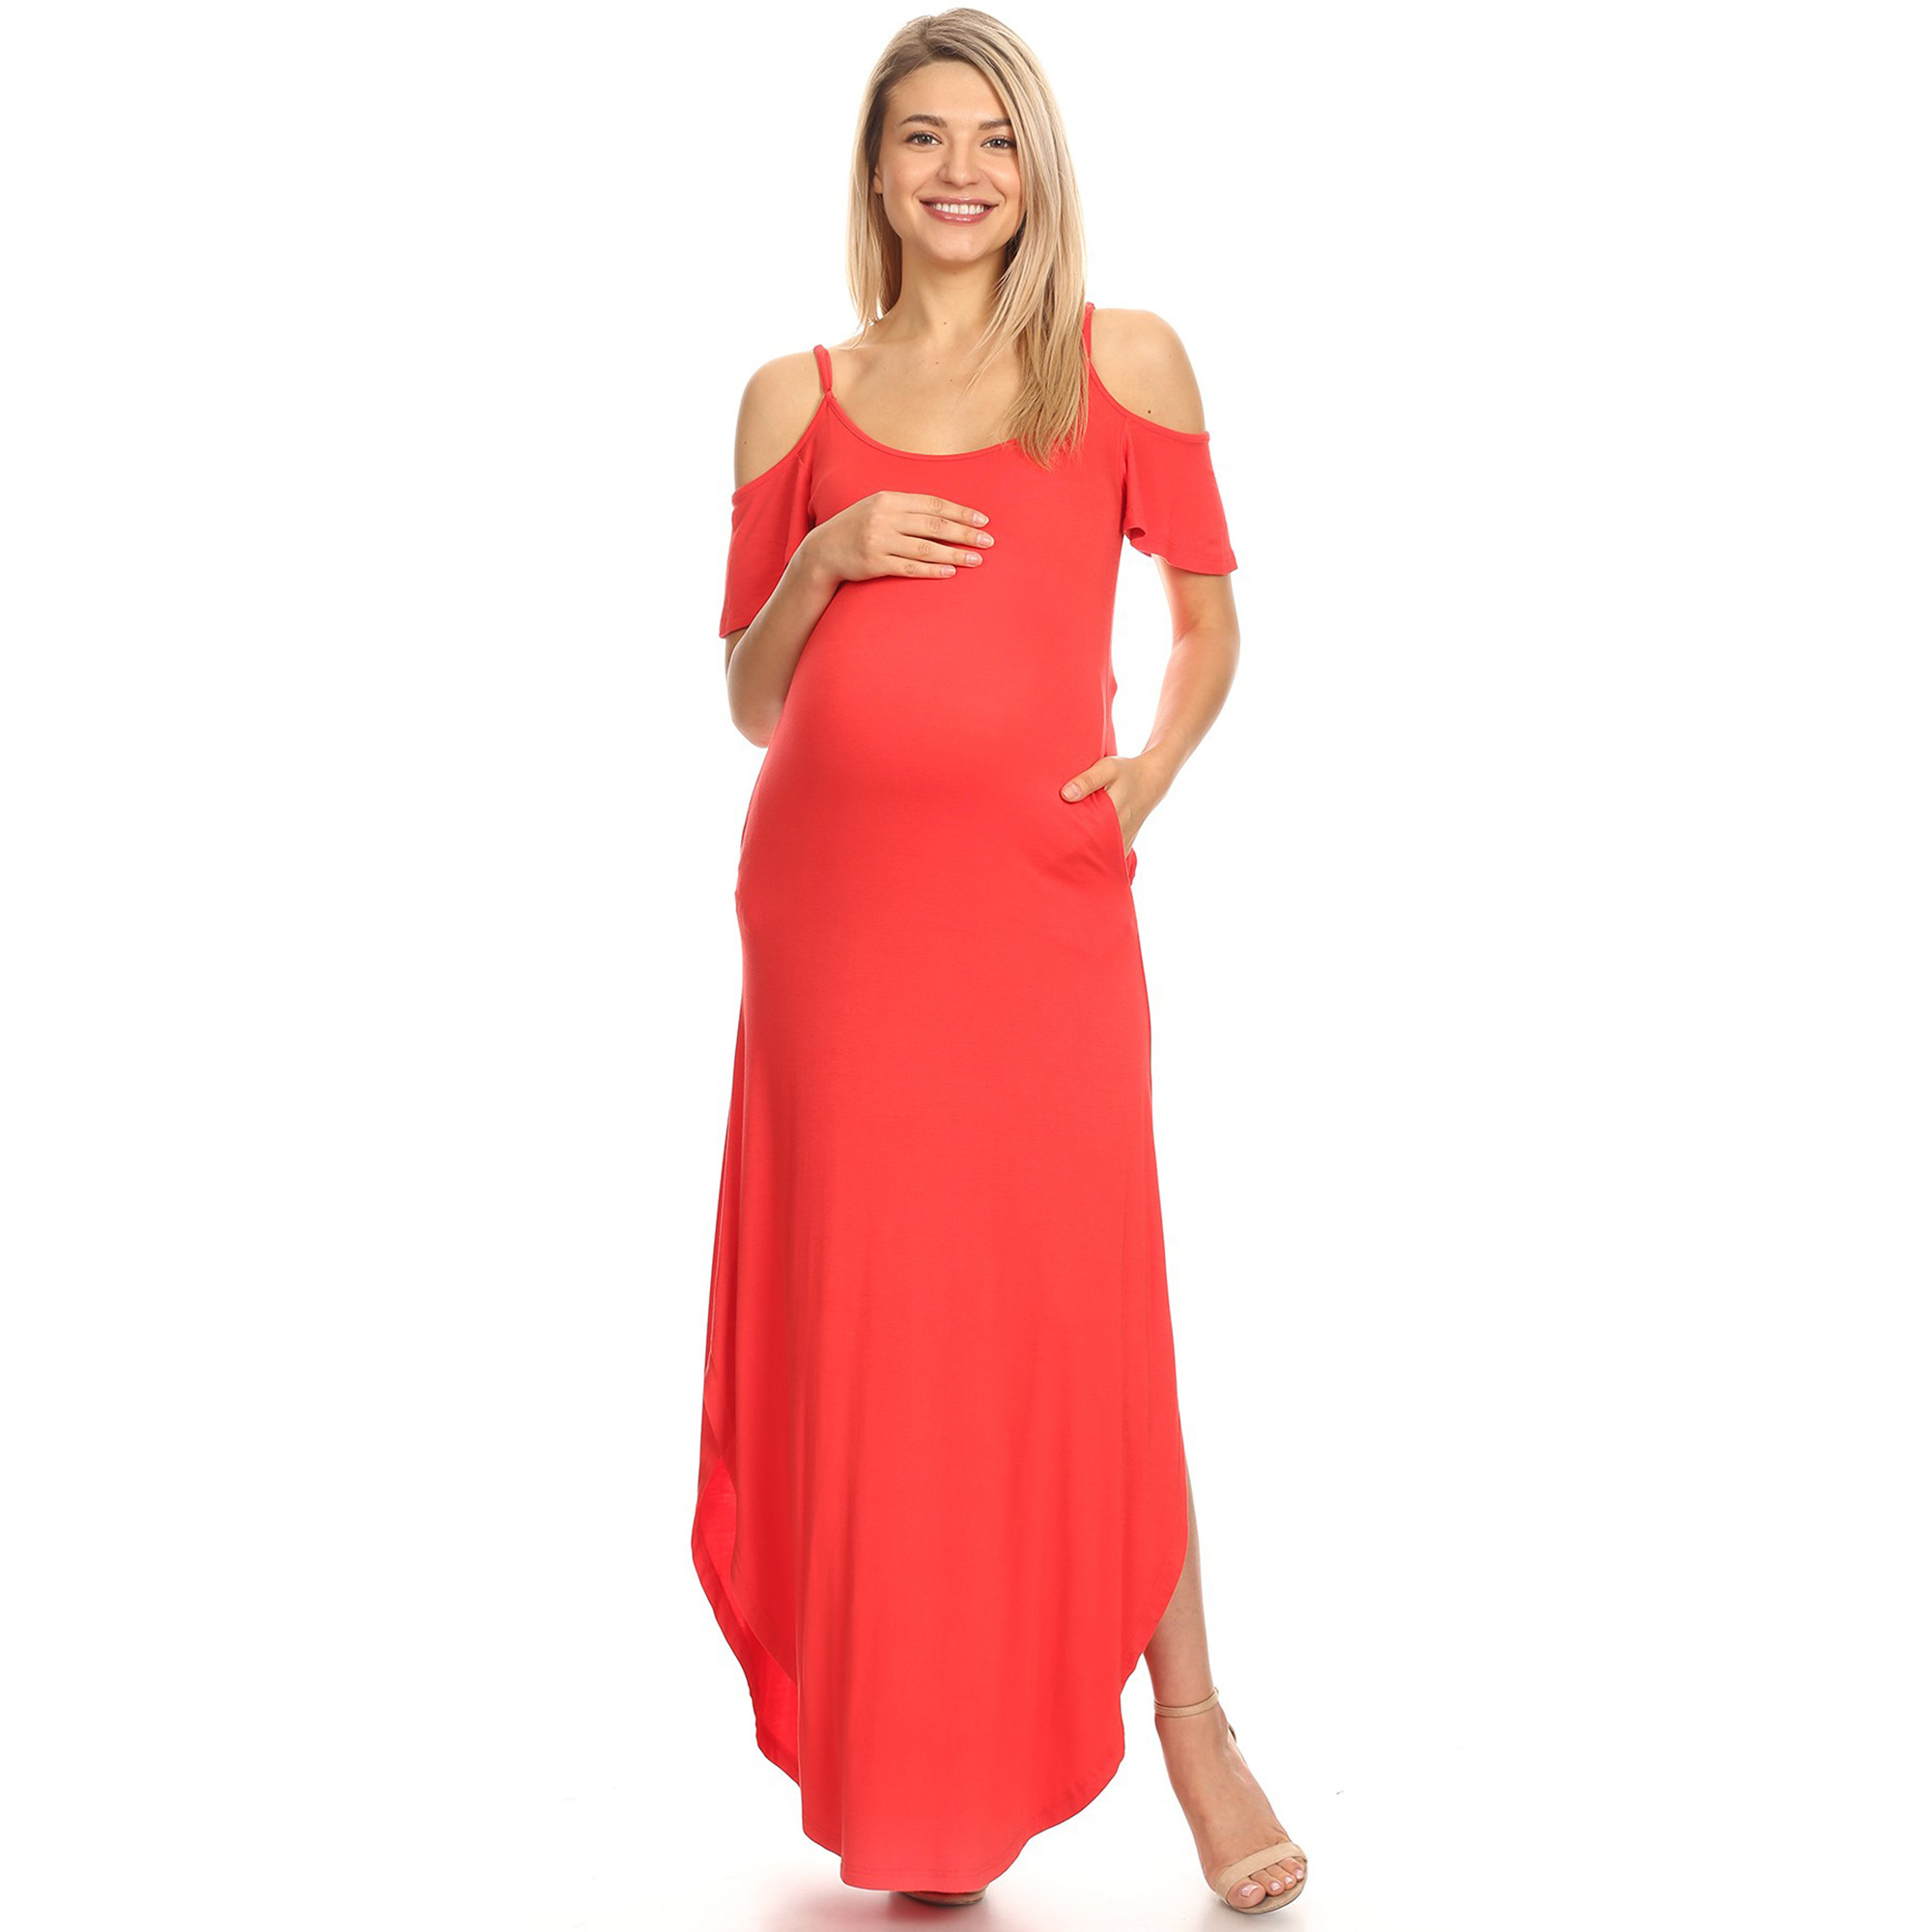 White Mark Women's Maternity Cold Shoulder Maxi Dress - Red, 3X